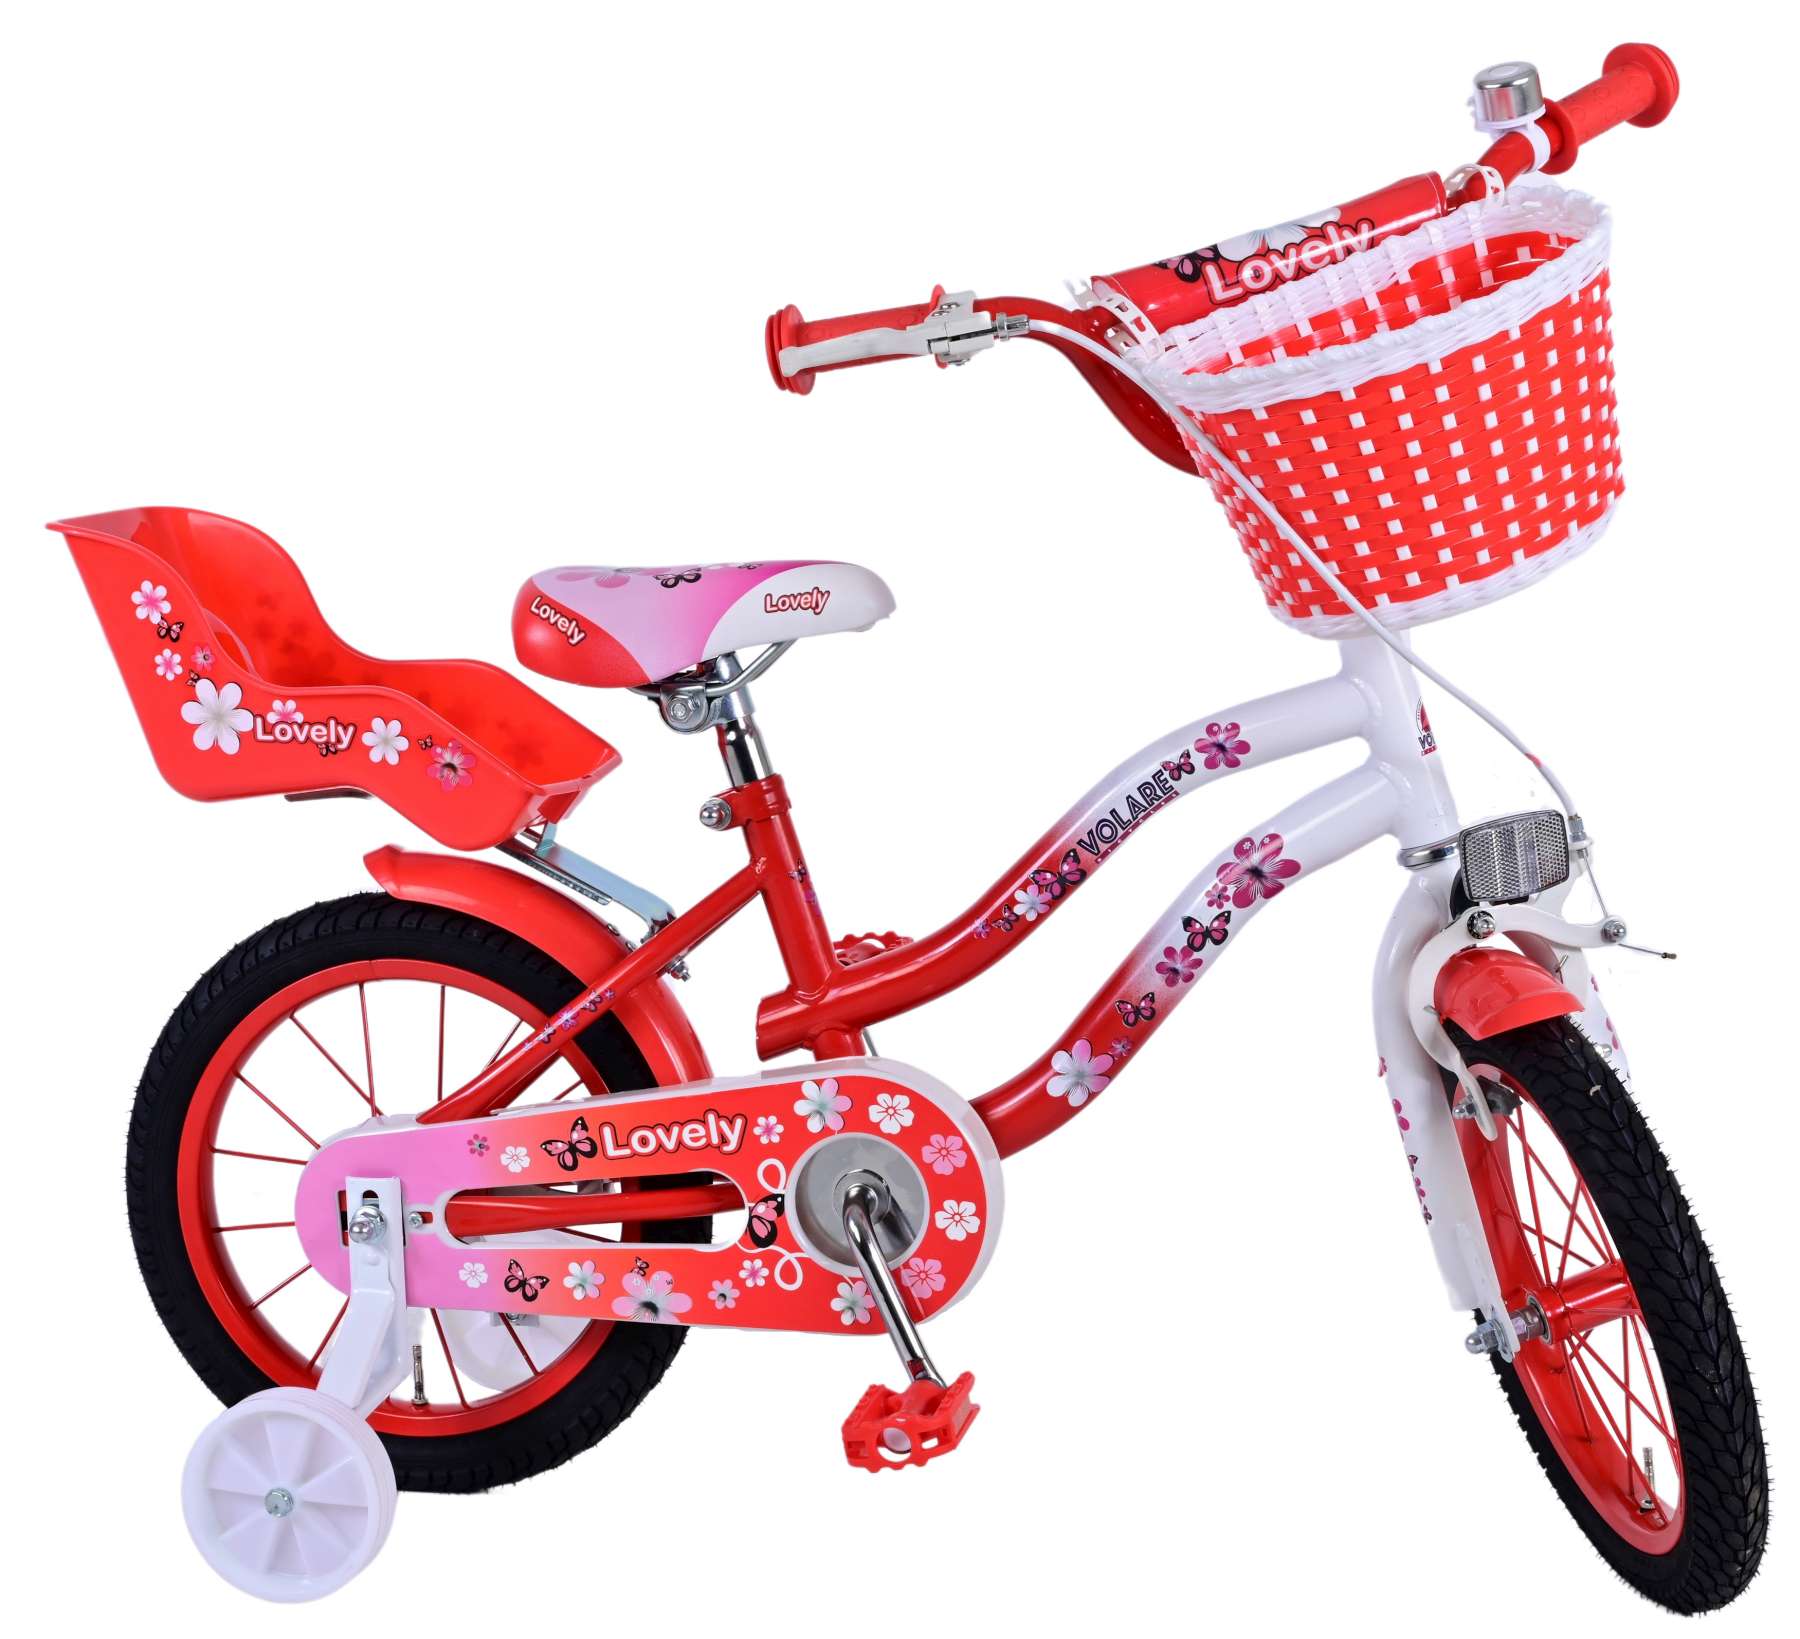 Volare_Lovely_kinderfiets_14_inch_-_1-W1800_puvu-q3